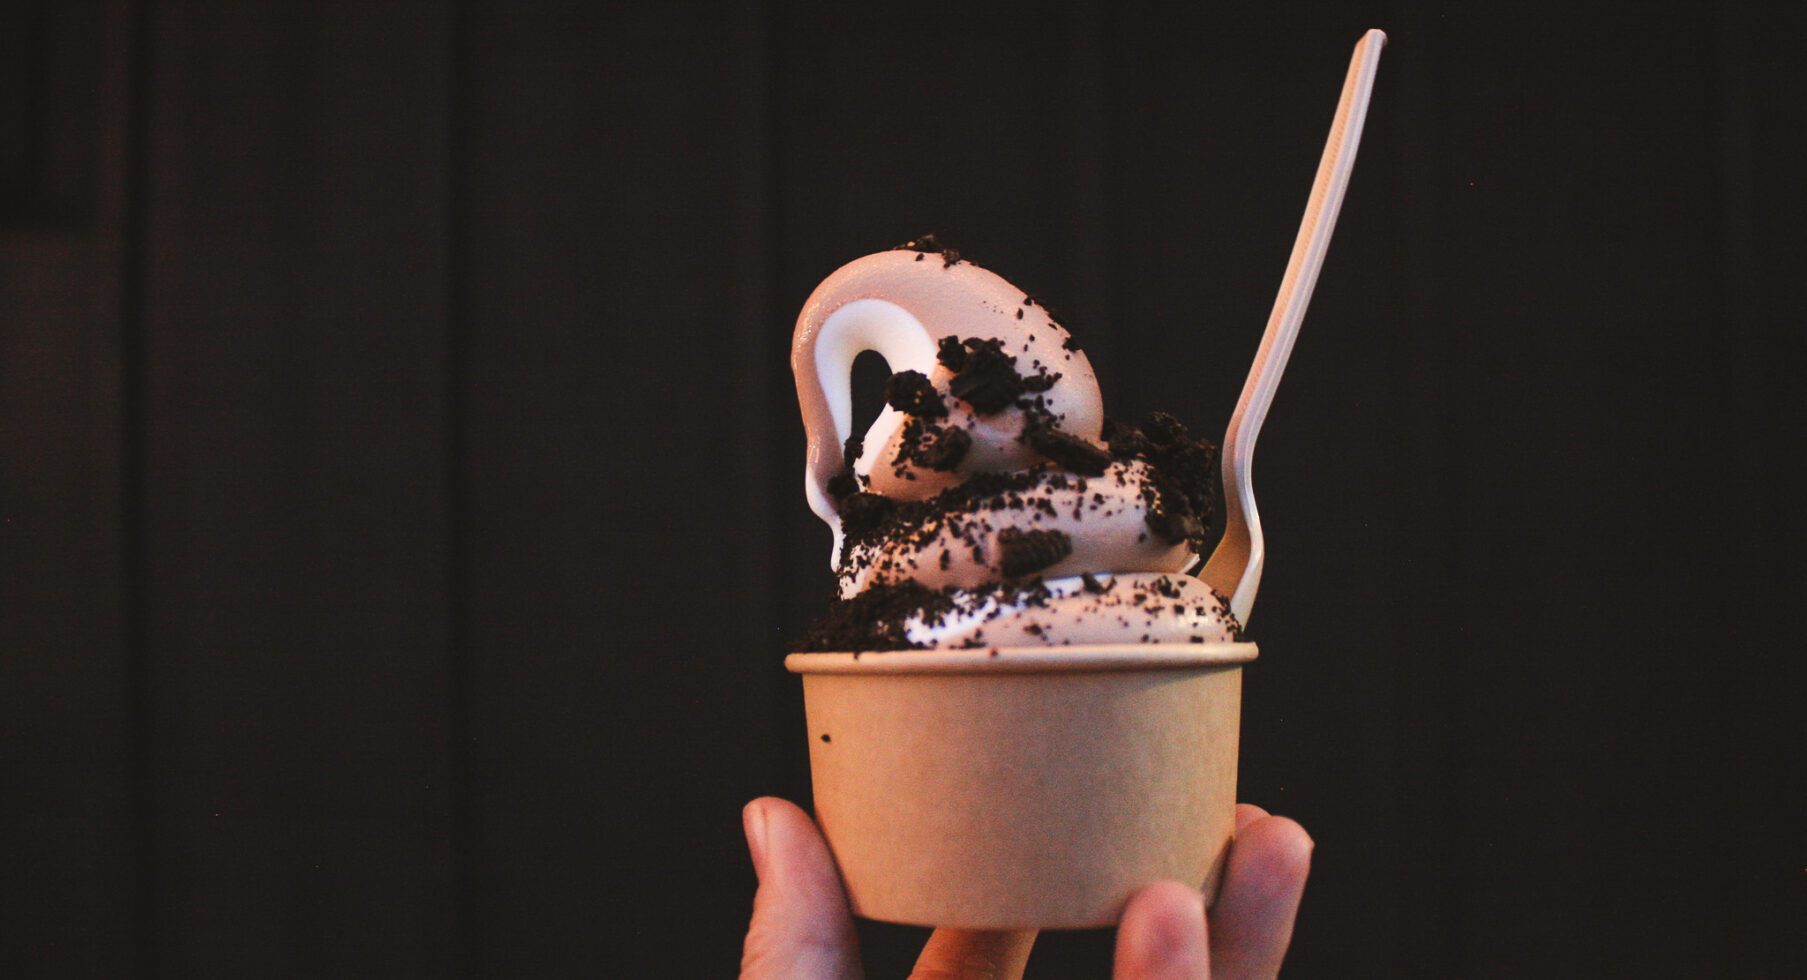 Photo captures a hand holding a cup of ice cream, ready to indulge.